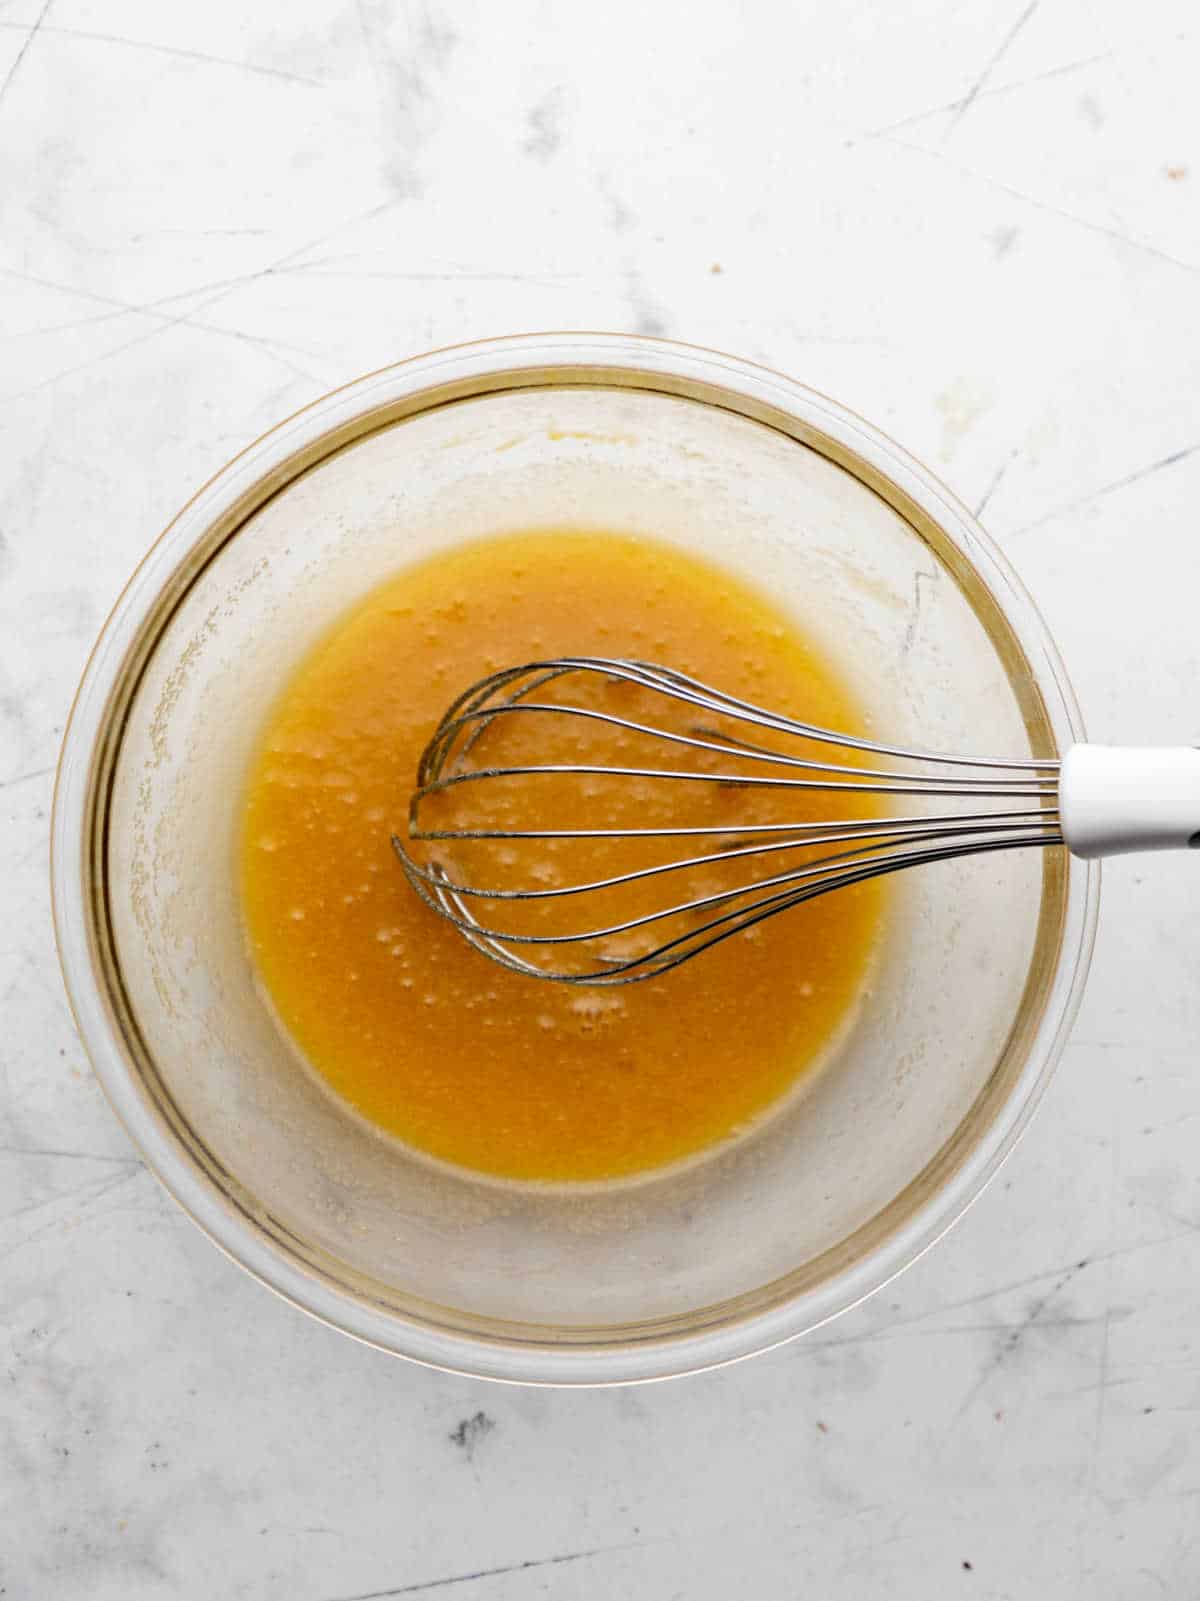 Egg whisked into melted butter and sugar.